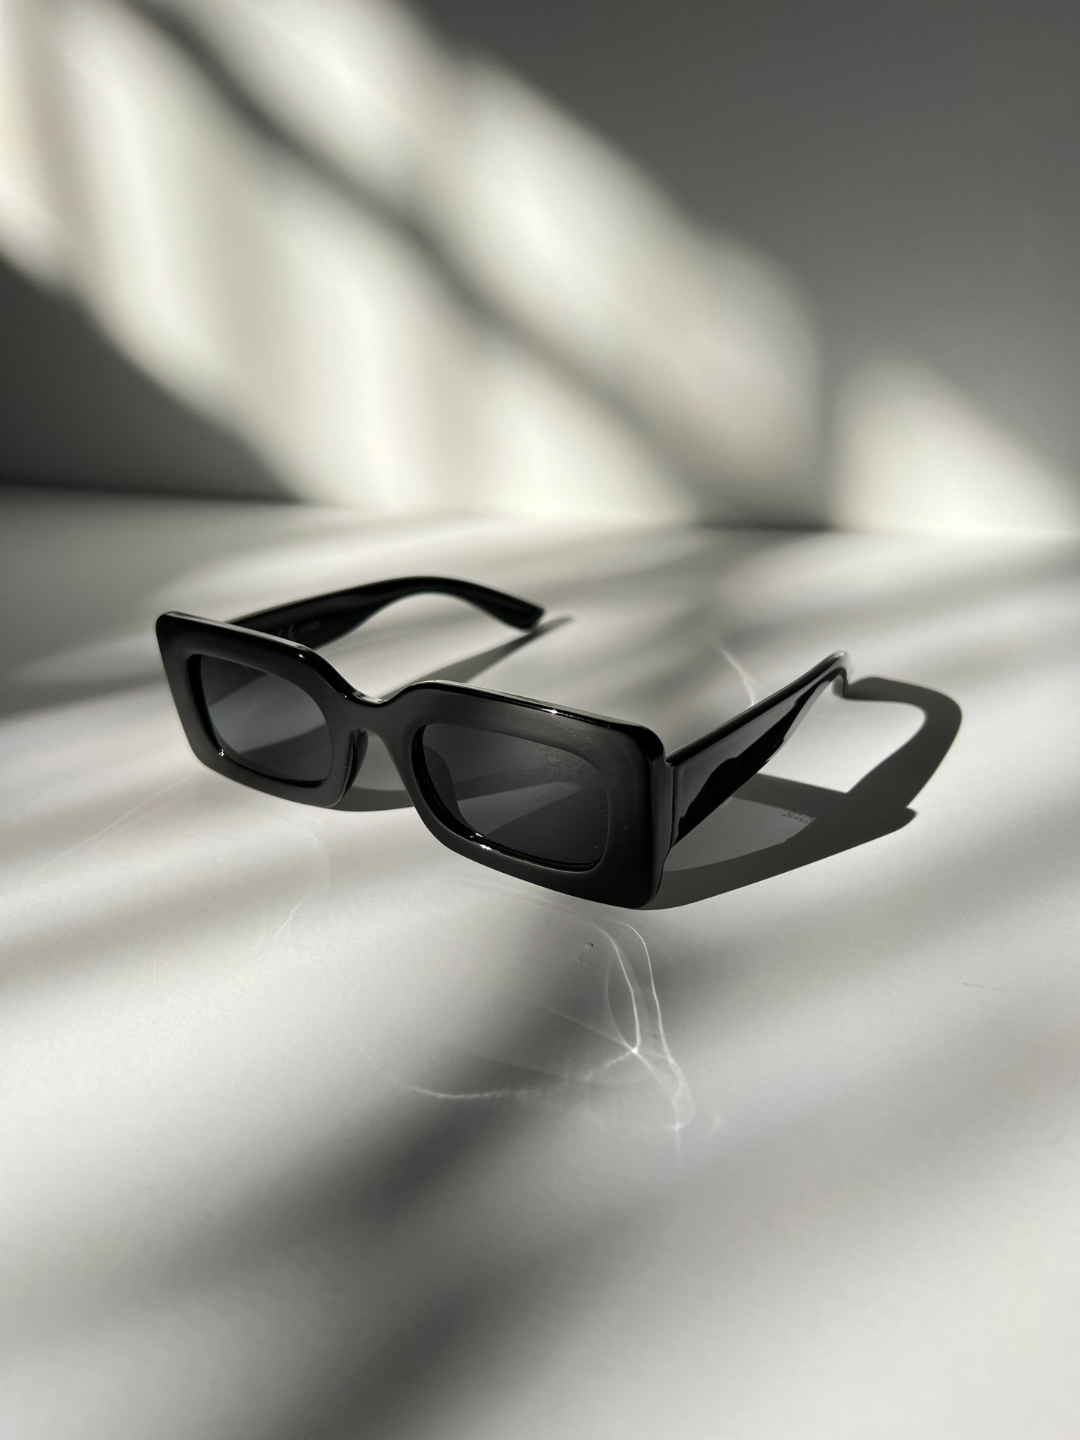 Kids rectangle sunglasses in black, on a grey background with areas of sunlight, creating shadows of the sunglasses.